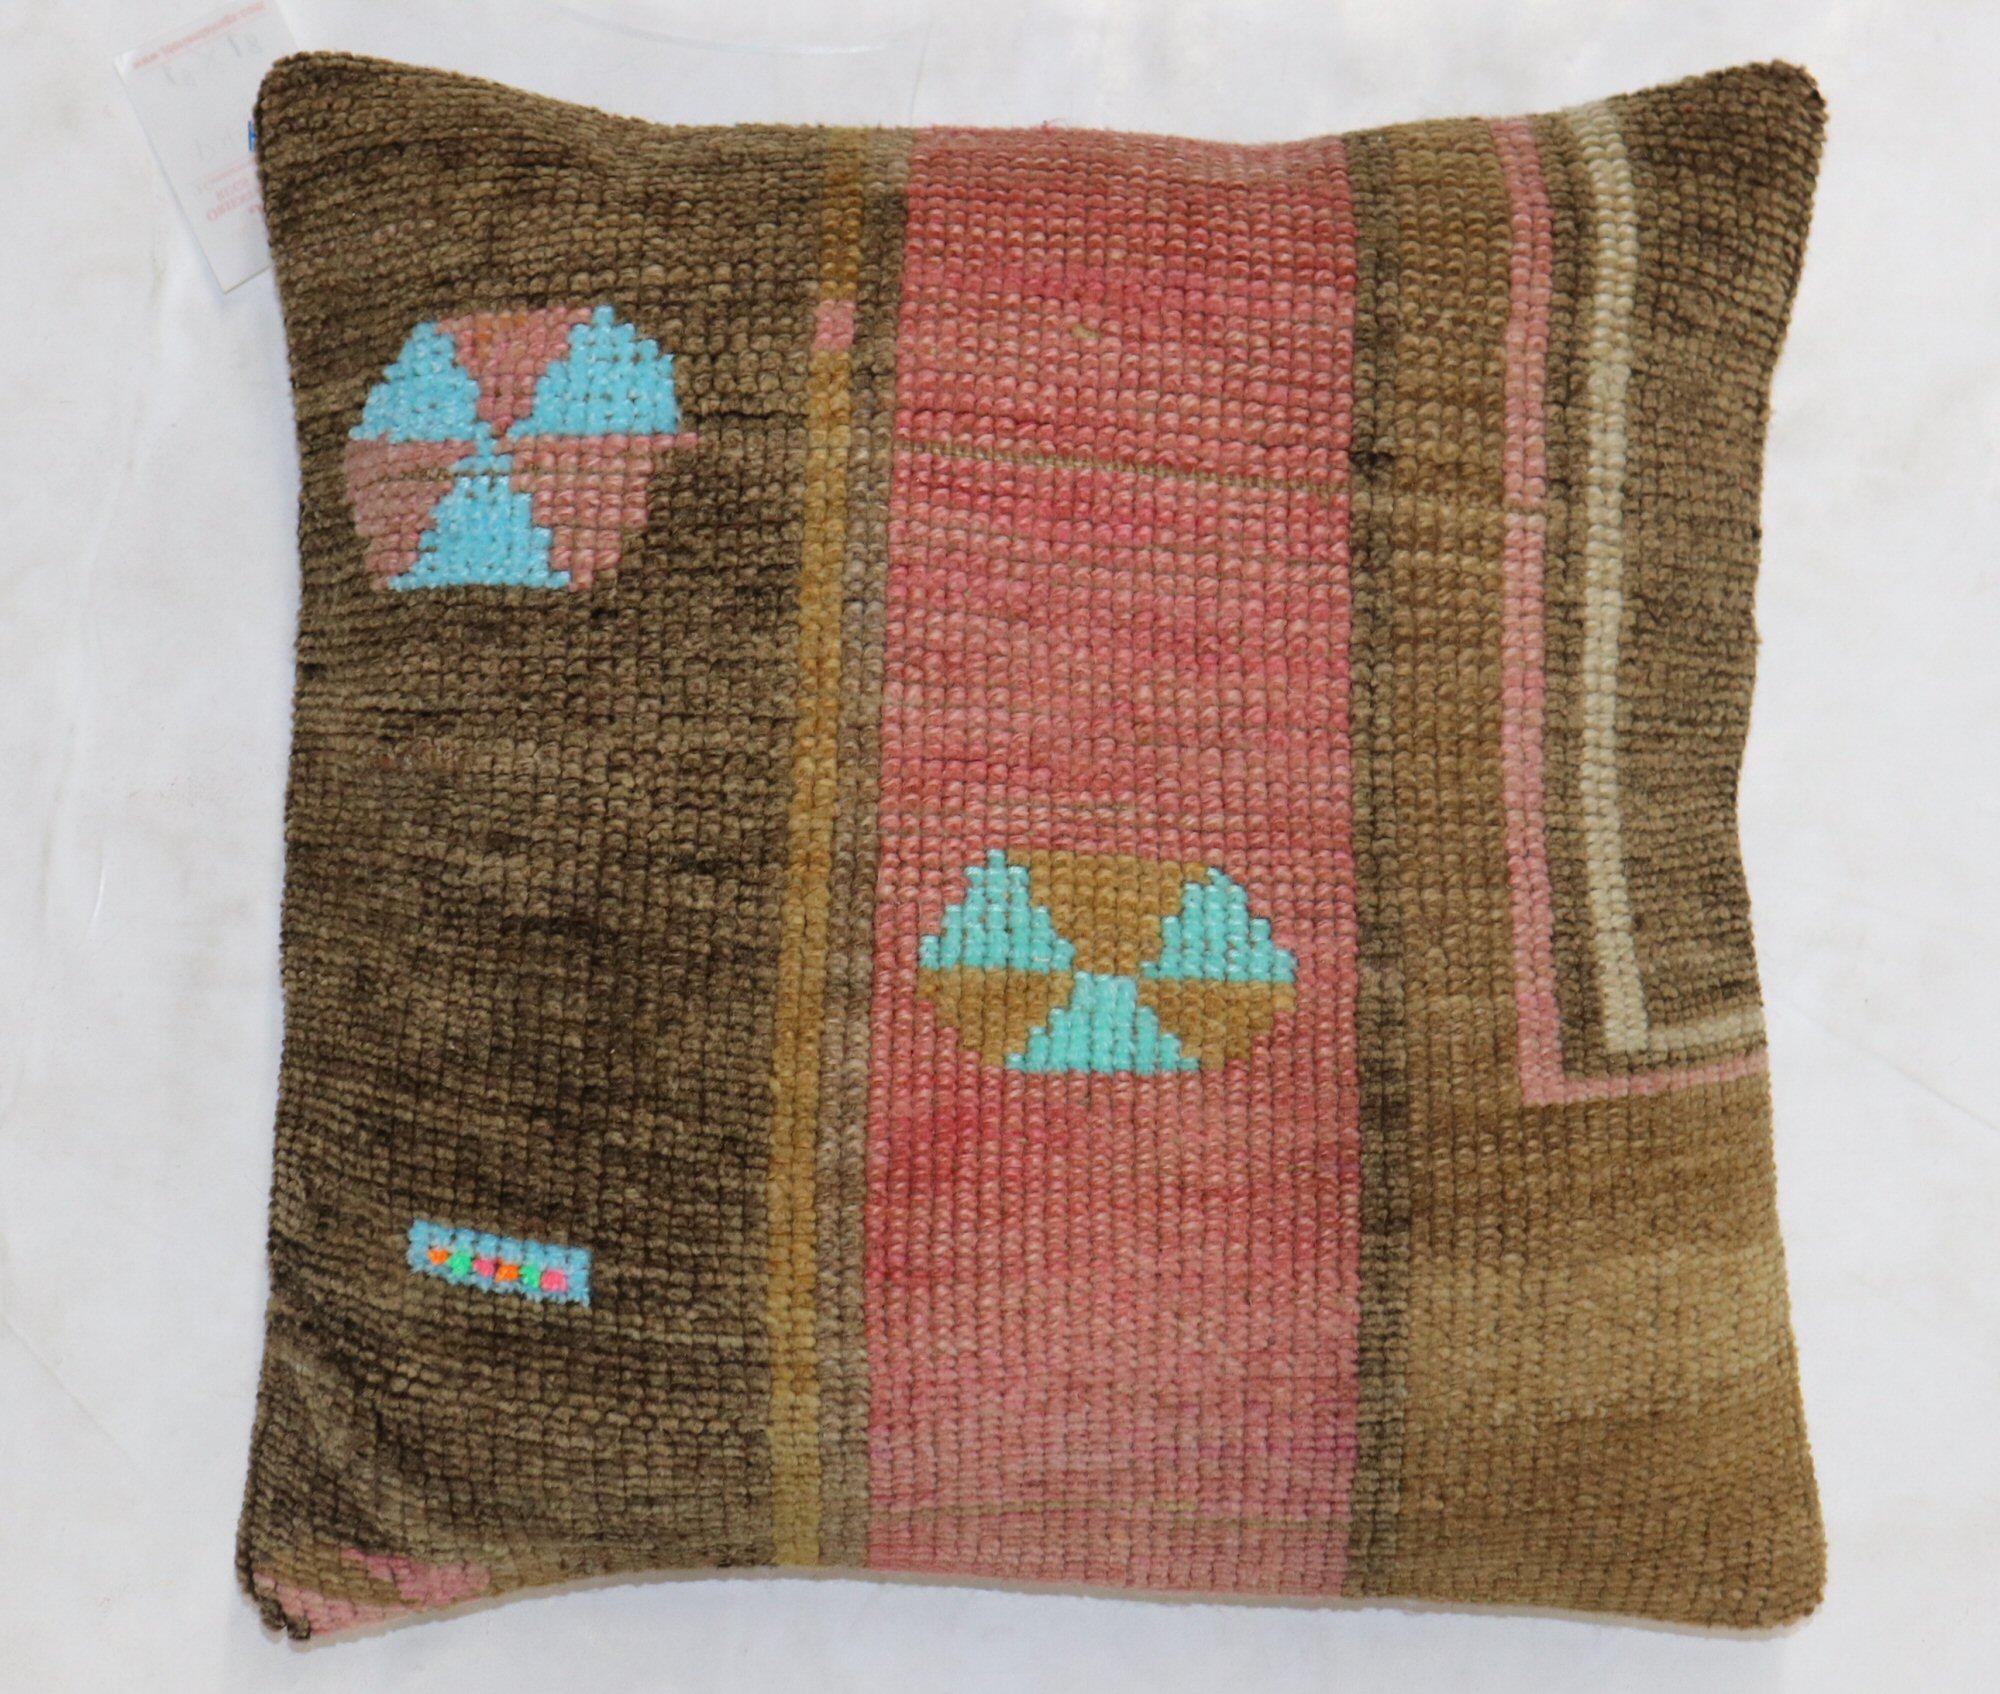 Pillow made from a mid 20th century Turkish rug. Foam and zipper closure provided

Measures: 20'' x 20''.